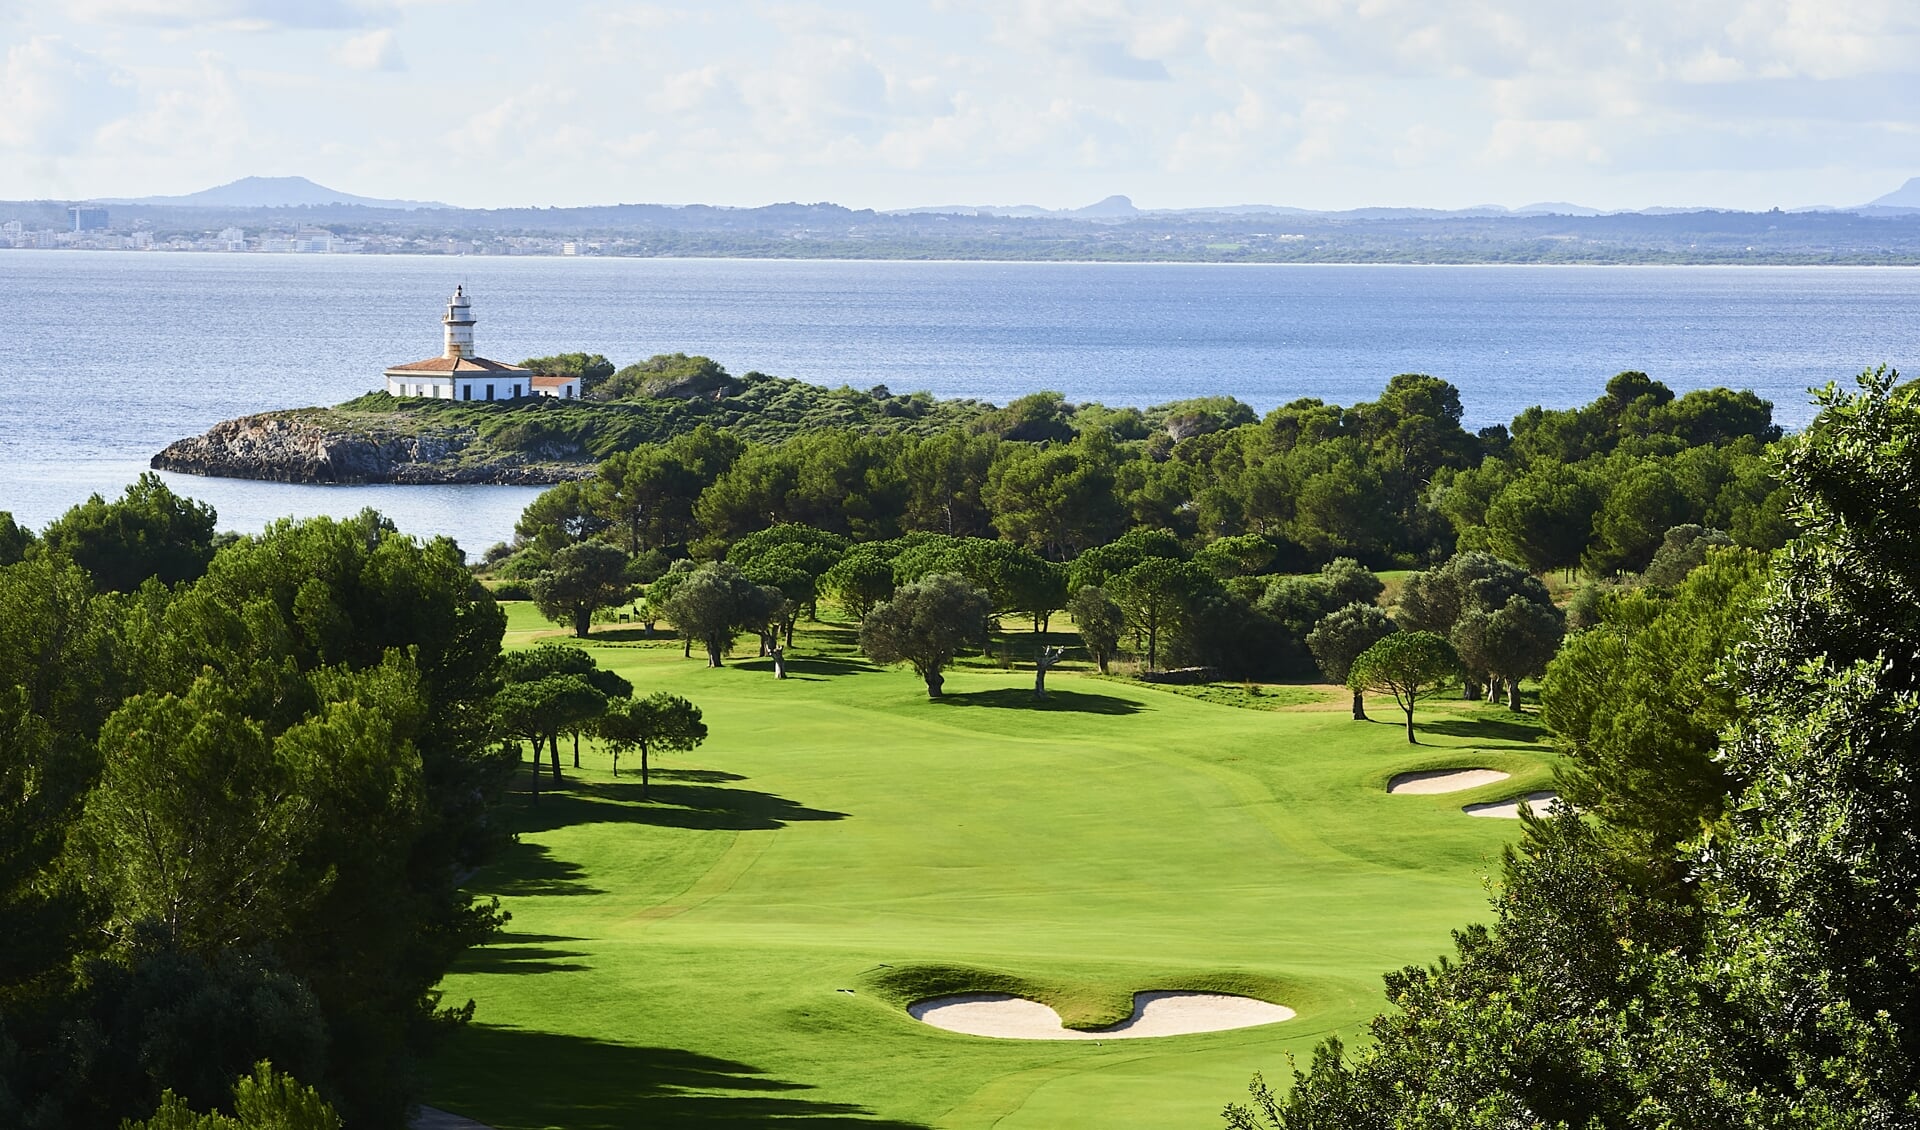 MALLORCA, SPAIN - NOVEMBER 05: General view of the Golf Alcanada golf course prior to the Challenge Tour Grand Final at Club de Golf Alcanada on November 05, 2019 in Mallorca, Spain. (Photo by Aitor Alcalde/Getty Images)